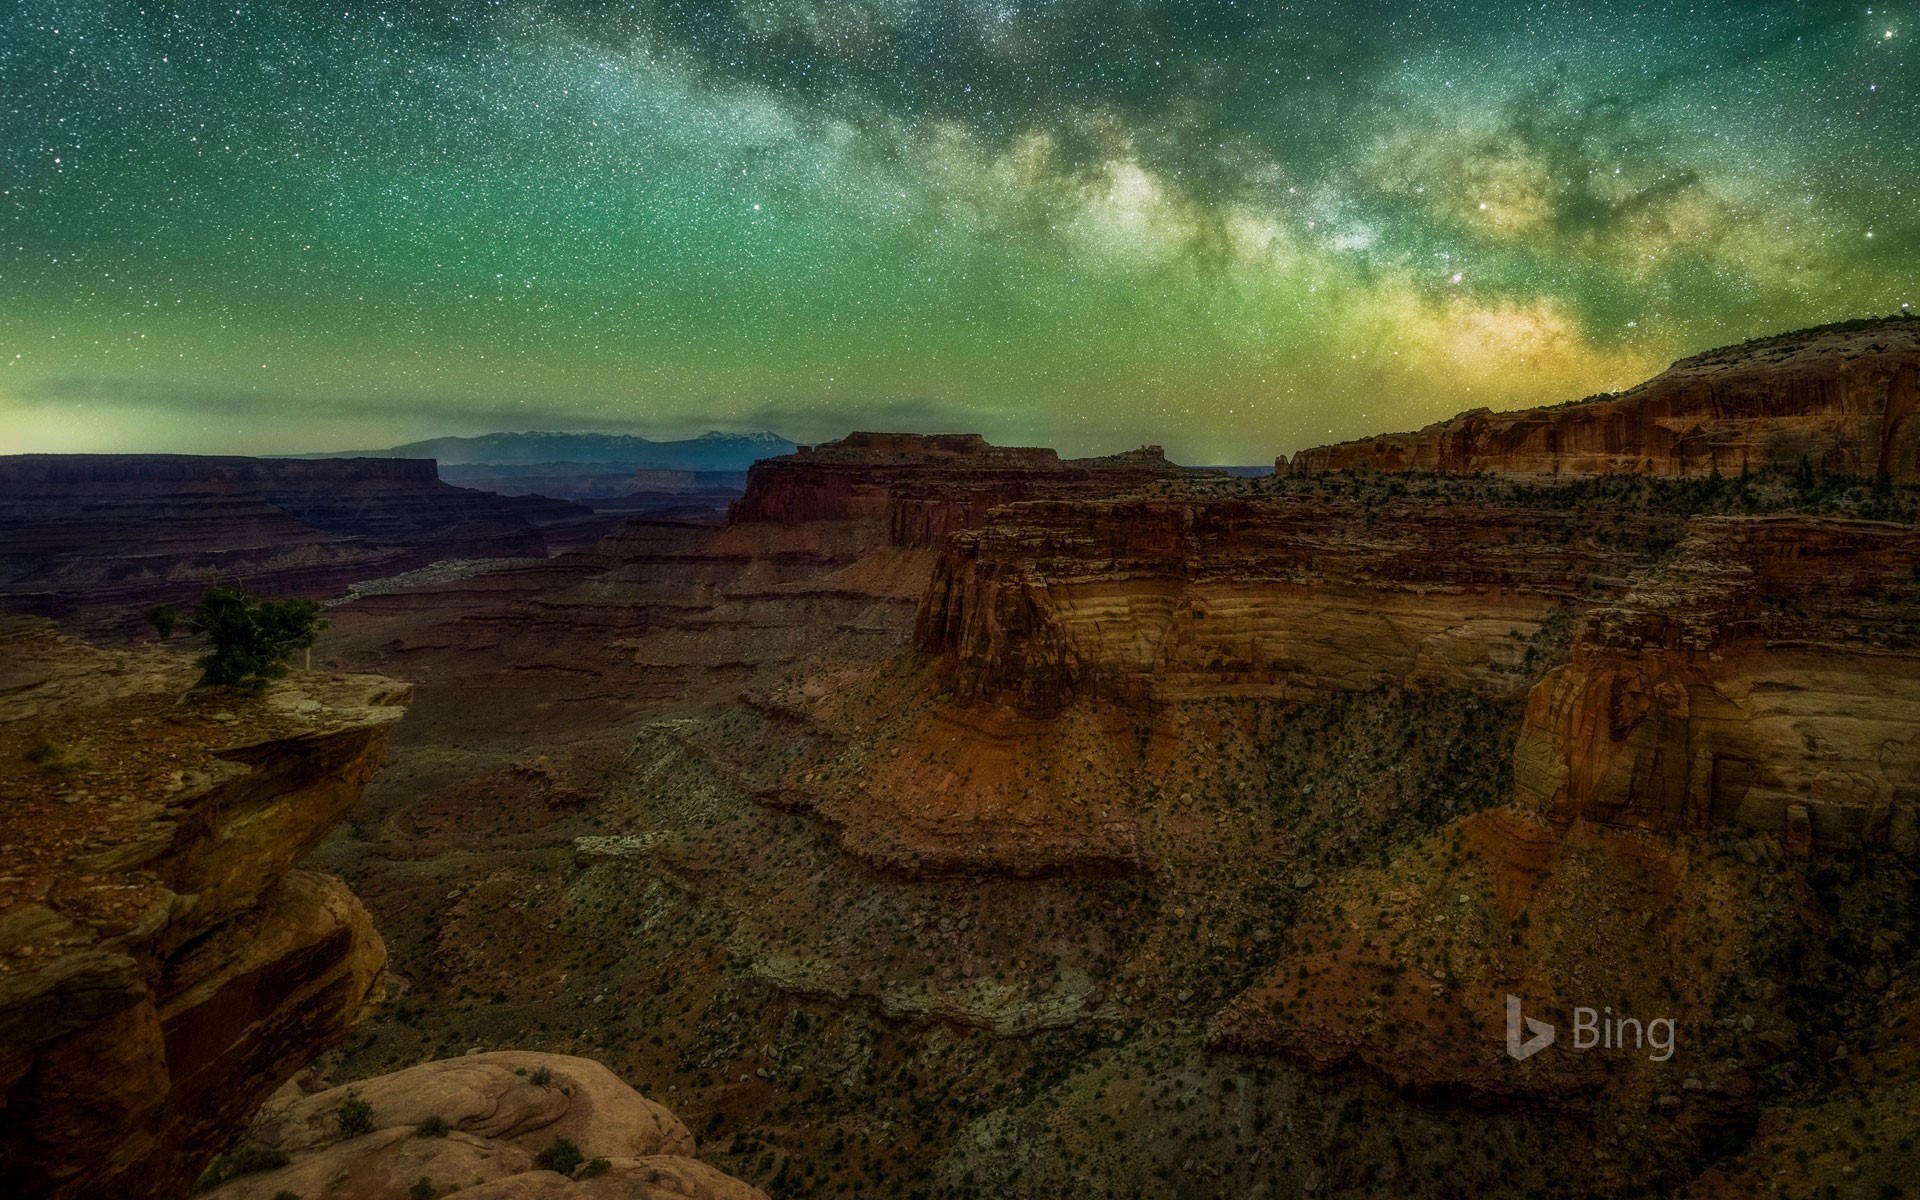 The Milky Way seen from Canyonlands National Park in Utah